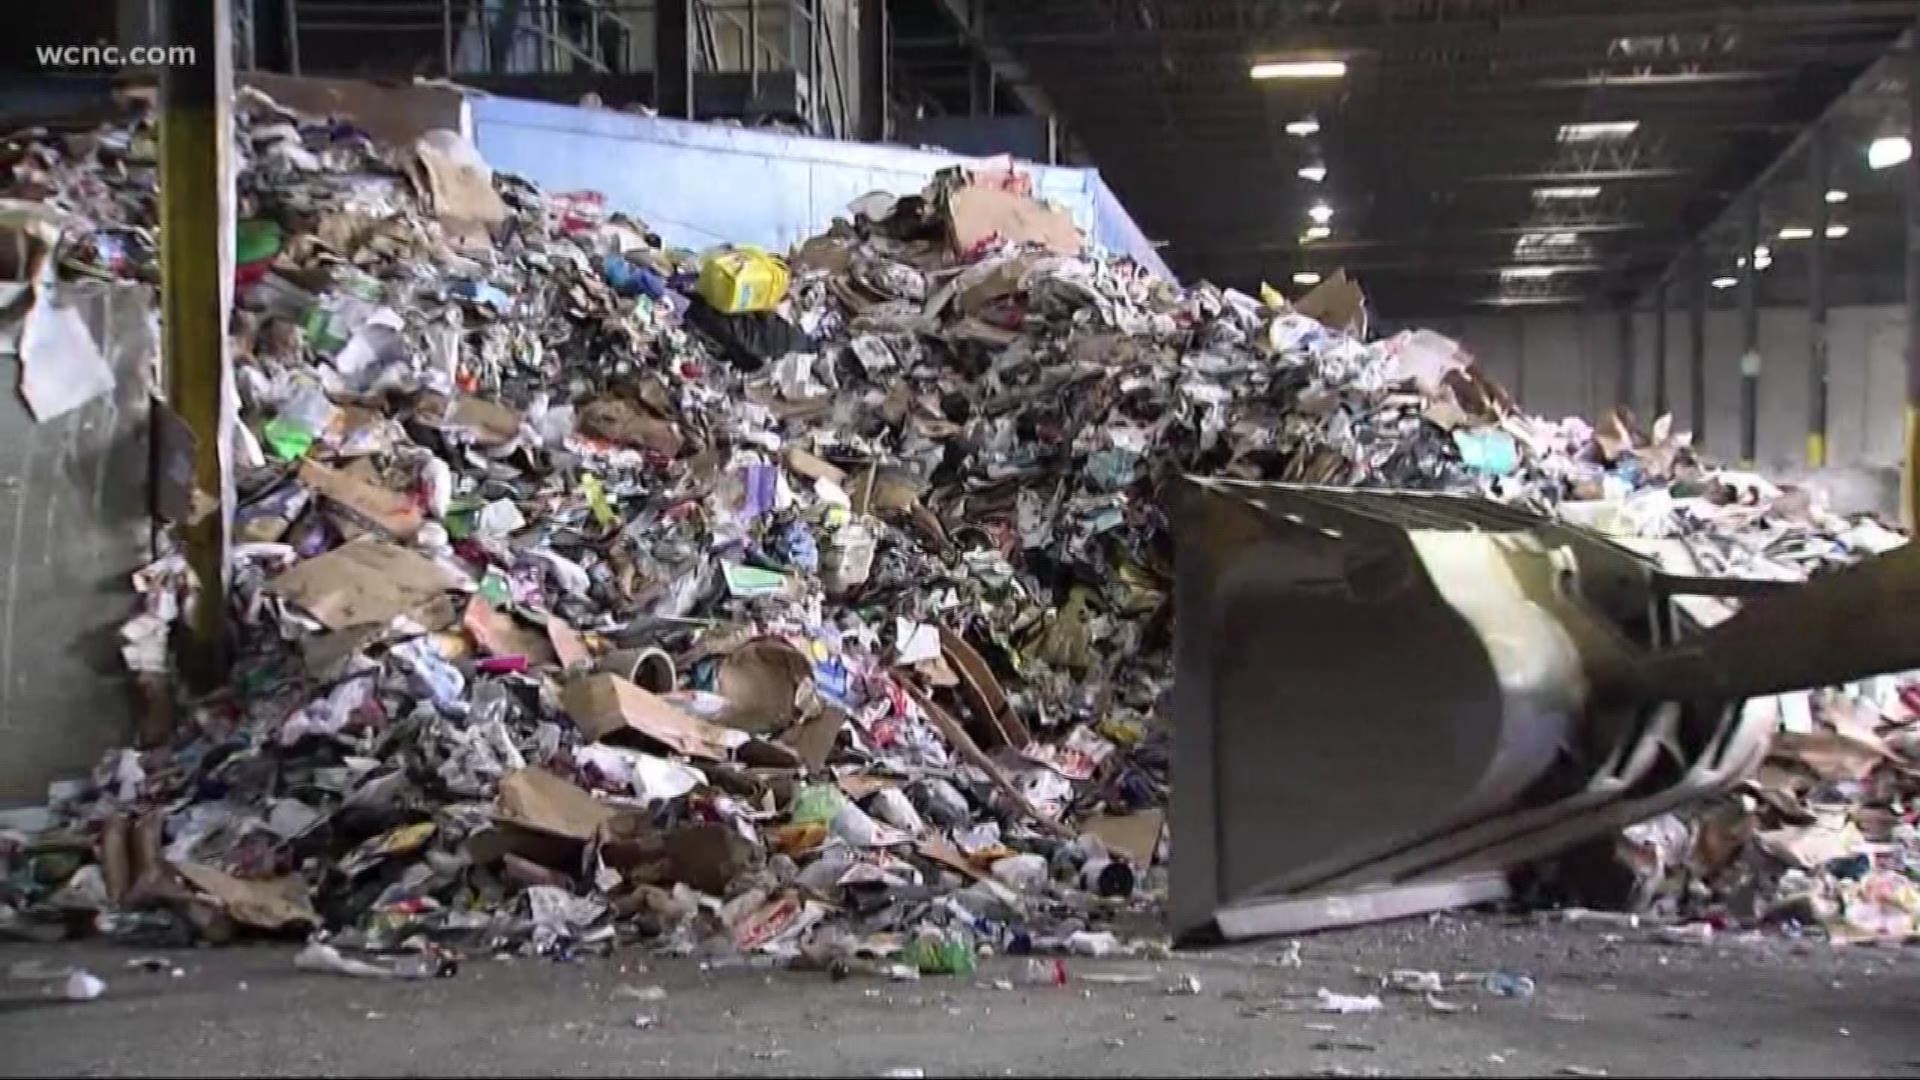 Since China stopped buying recyclables from the US, cities and towns have been forced to raise prices or stop recycling programs all together.